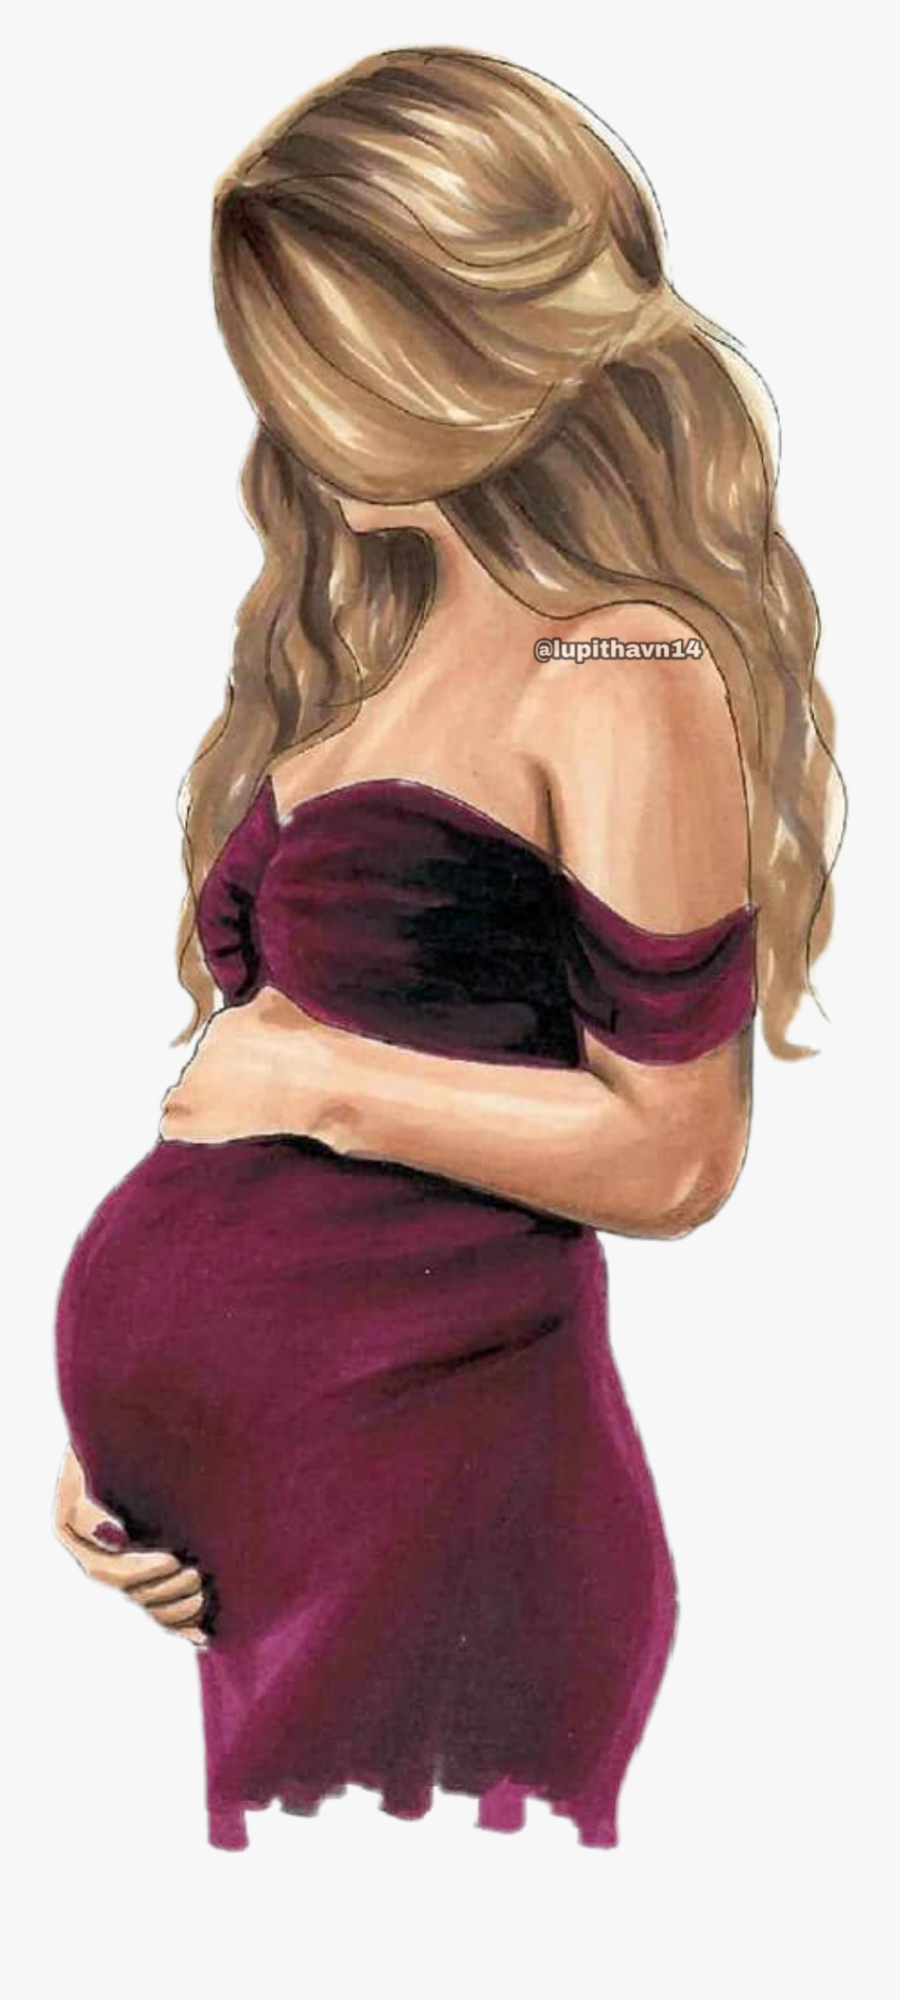 How To Draw A Pregnant Woman Front View